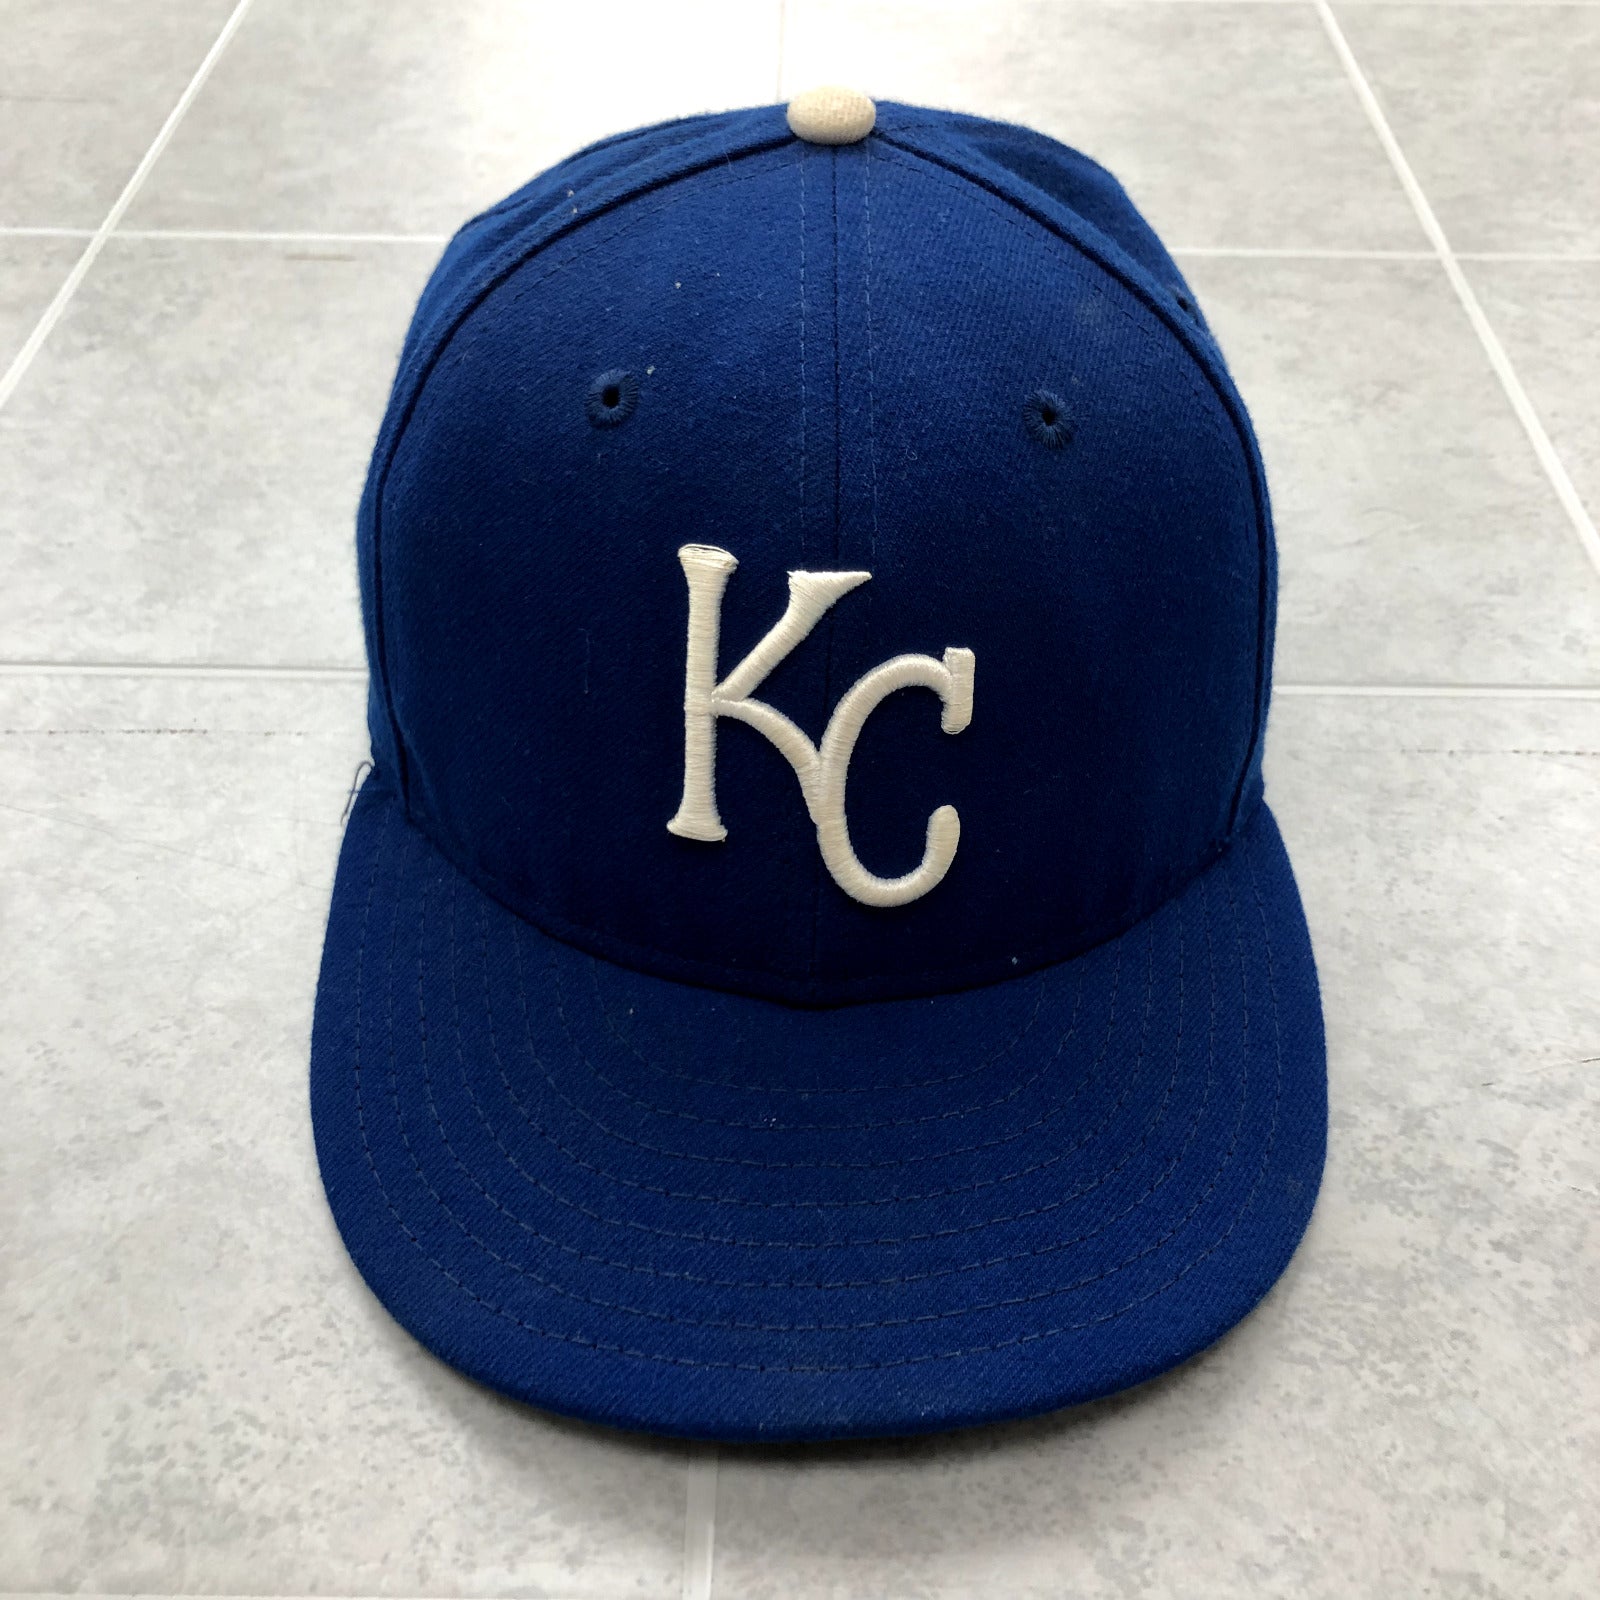 NEW ERA Blue Graphic Kansas City Royals Fitted Baseball Cap Adult Size 7 1/4